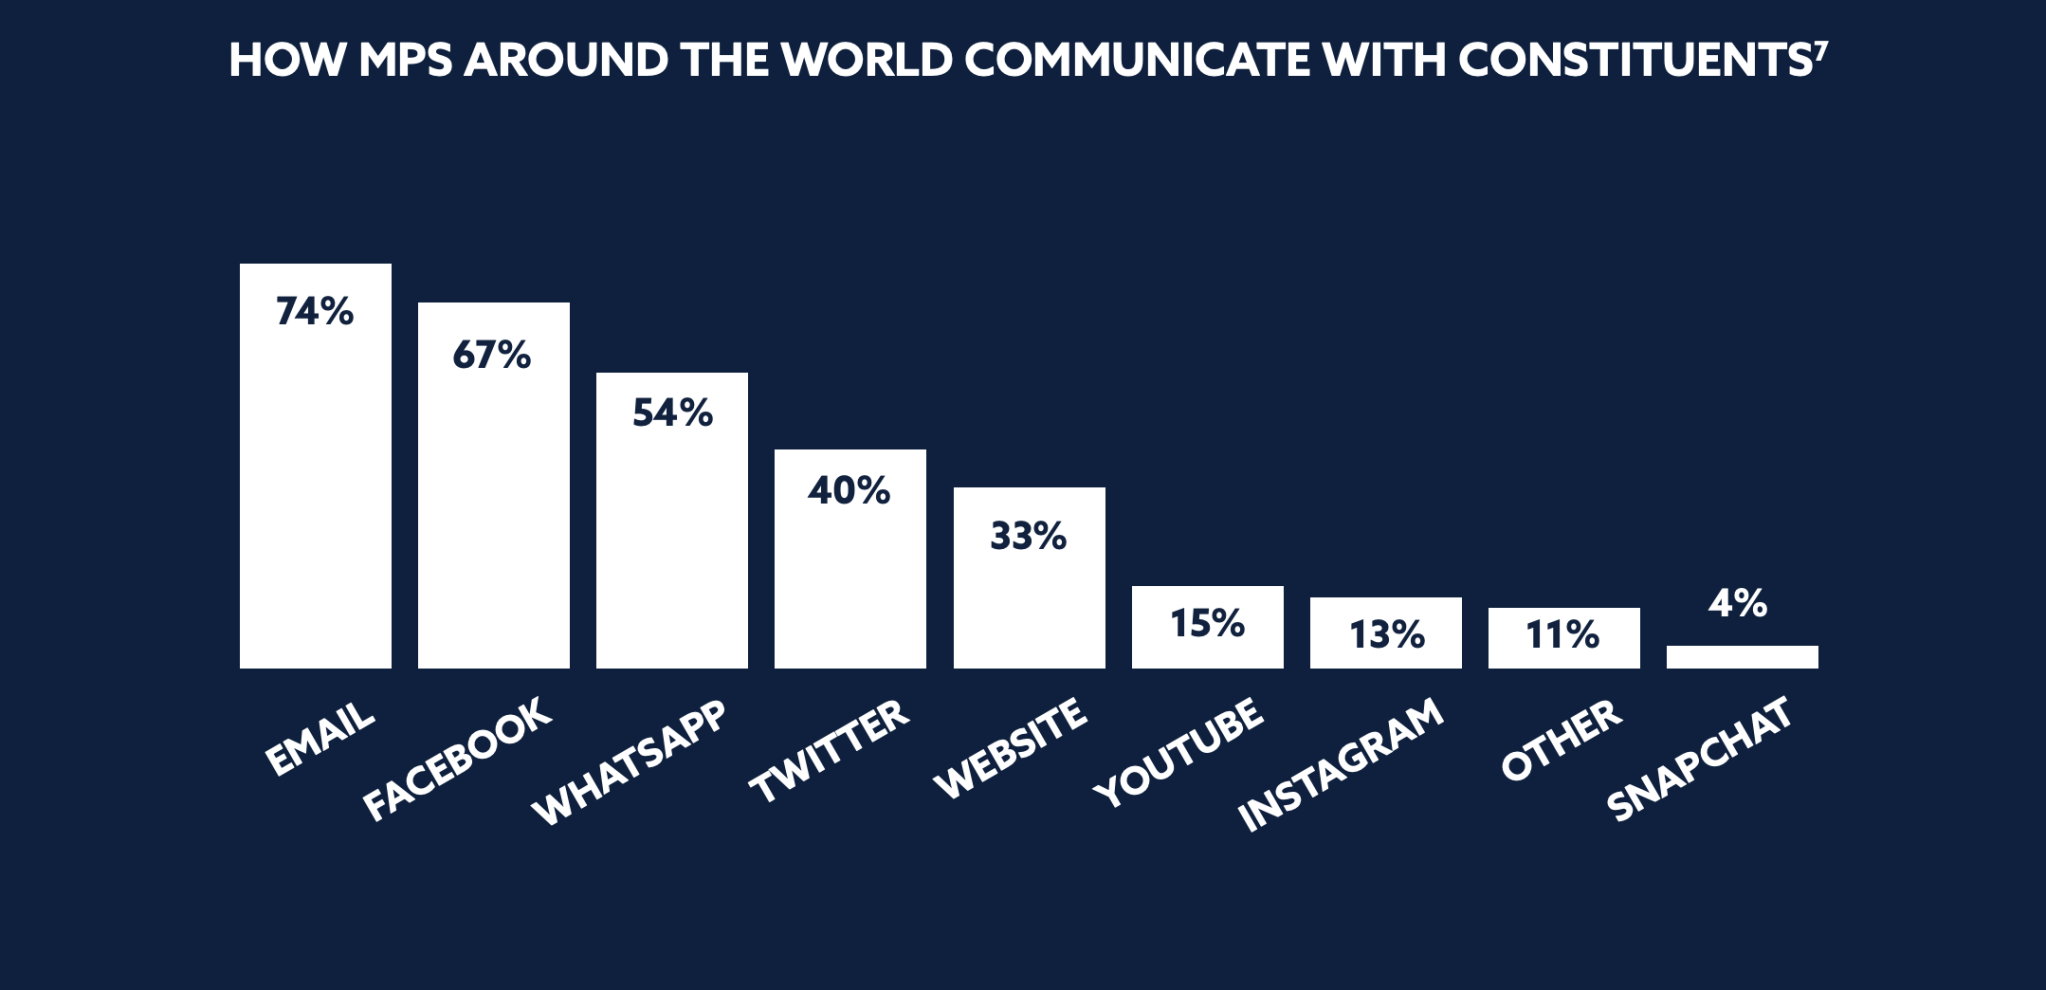 How MPs Around the World Communicate with Constituents: A chart